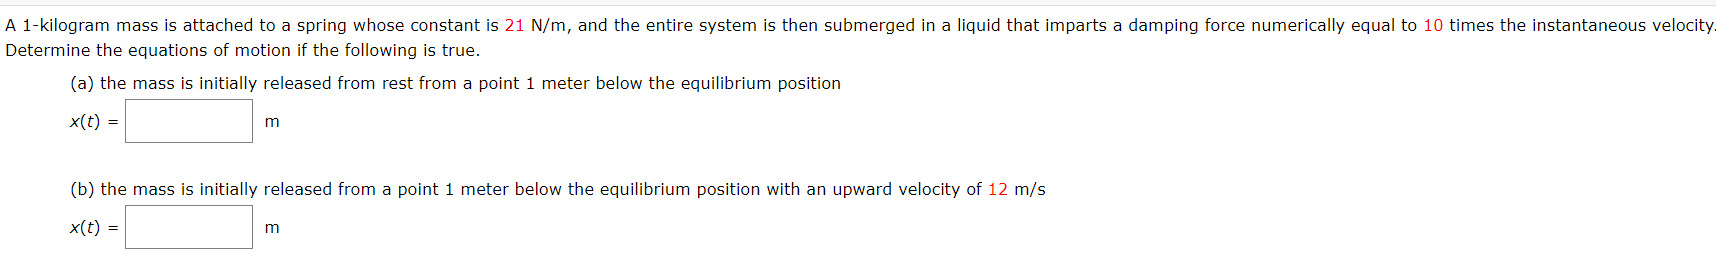 A 1-kilogram mass is attached to a spring whose constant is 21 N/m, and the entire system is then submerged in a liquid that imparts a damping force numerically equal to 10 times the instantaneous velocity
Determine the equations of motion if the following is true.
(a) the mass is initially released from rest from a point 1 meter below the equilibrium position
x(t) =
(b) the mass is initially released from a point 1 meter below the equilibrium position with an upward velocity of 12 m/s
x(t) =
m
